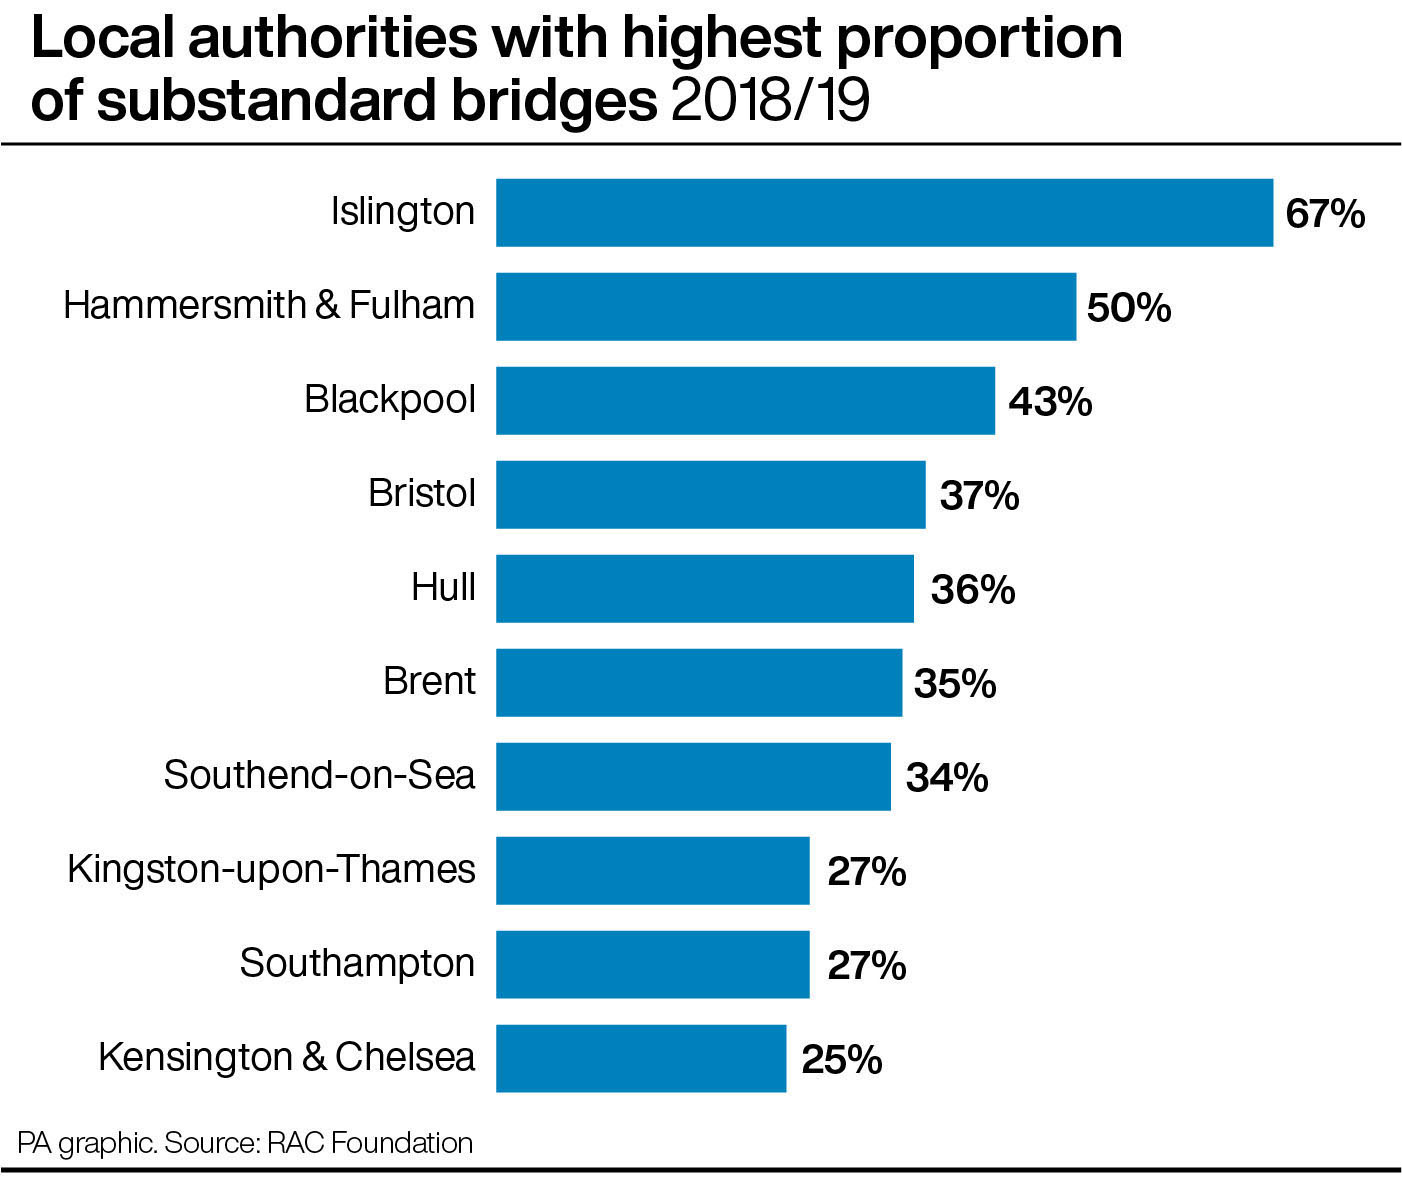 Local authorities with highest proportion of substandard bridges 2018/19